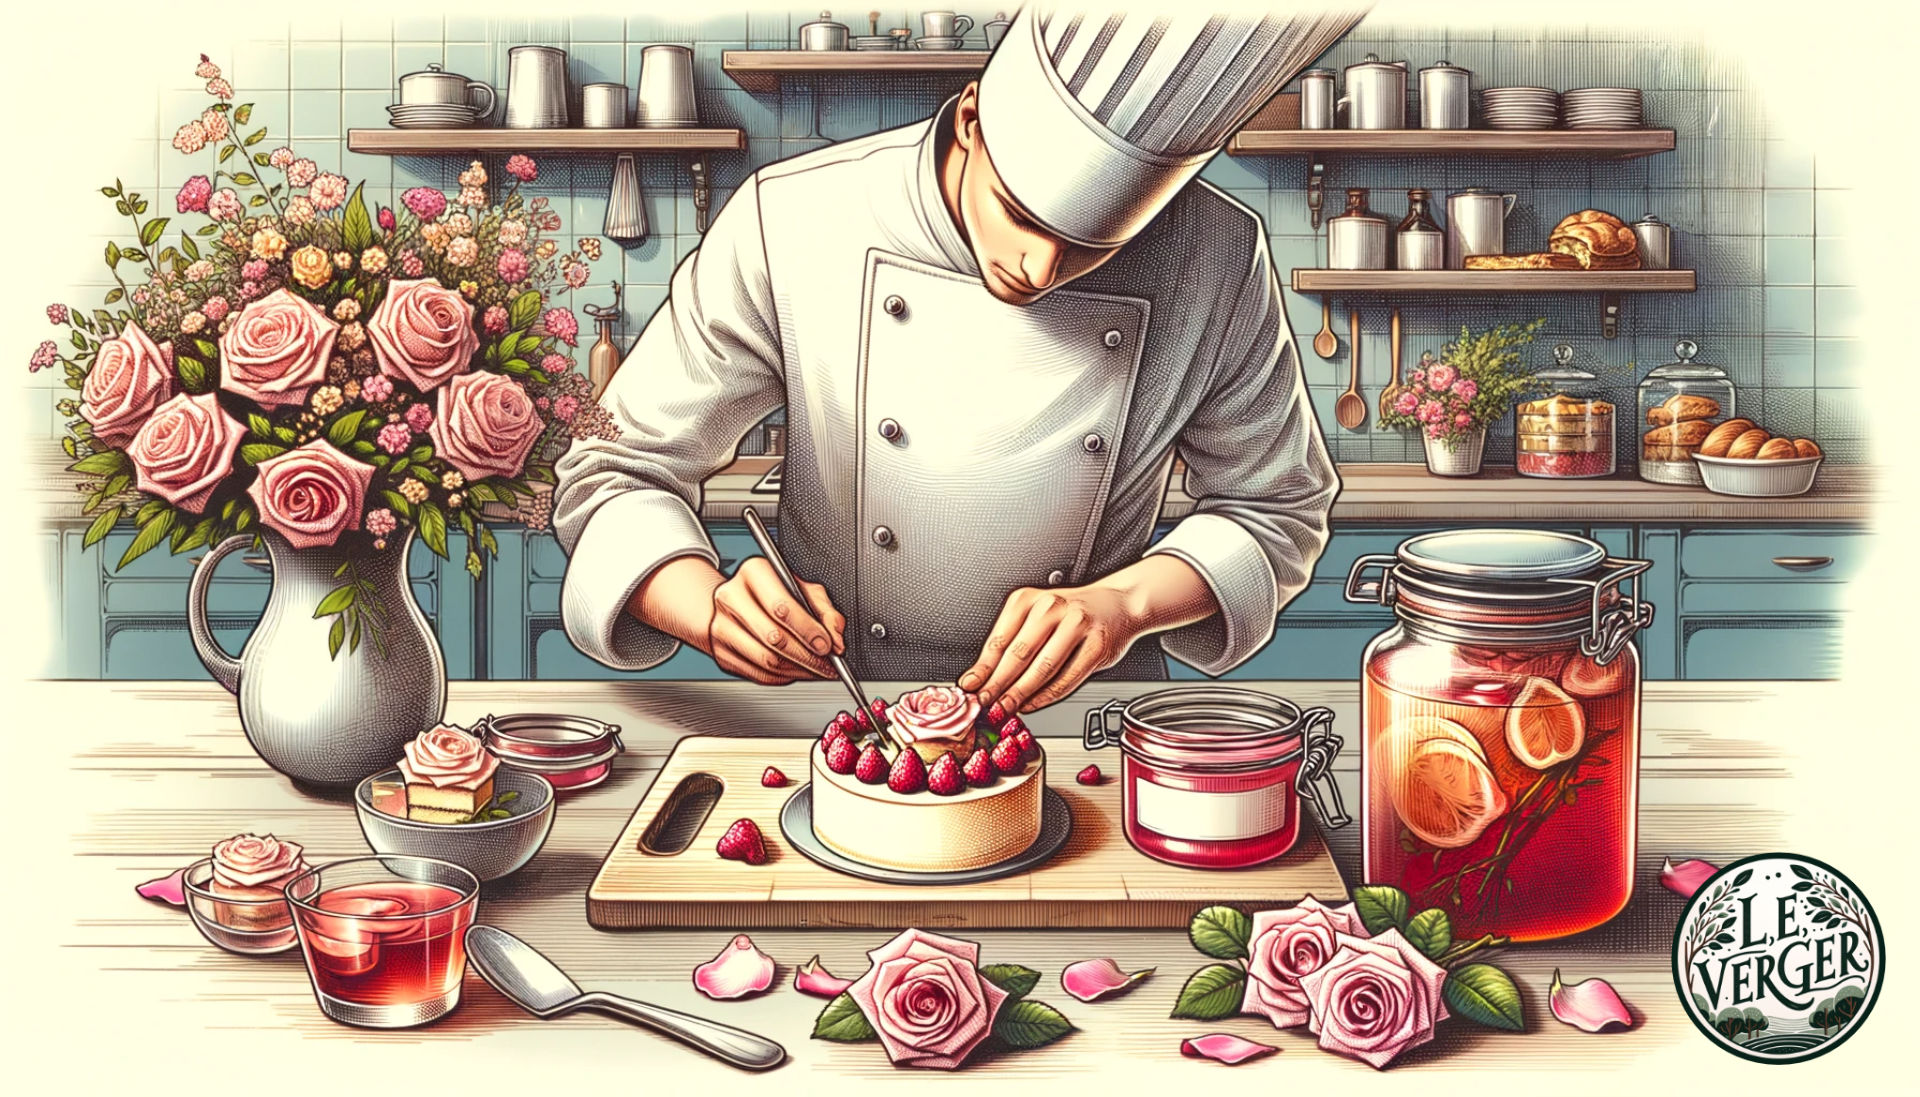 Illustration of a gourmet kitchen scene featuring culinary delights made from roses. A chef delicately decorates a rose-flavoured dessert, a jar of rose jam sits on the counter, and a pitcher of rose-infused drink is garnished with fresh rose petals. The ambiance is inviting and aromatic.